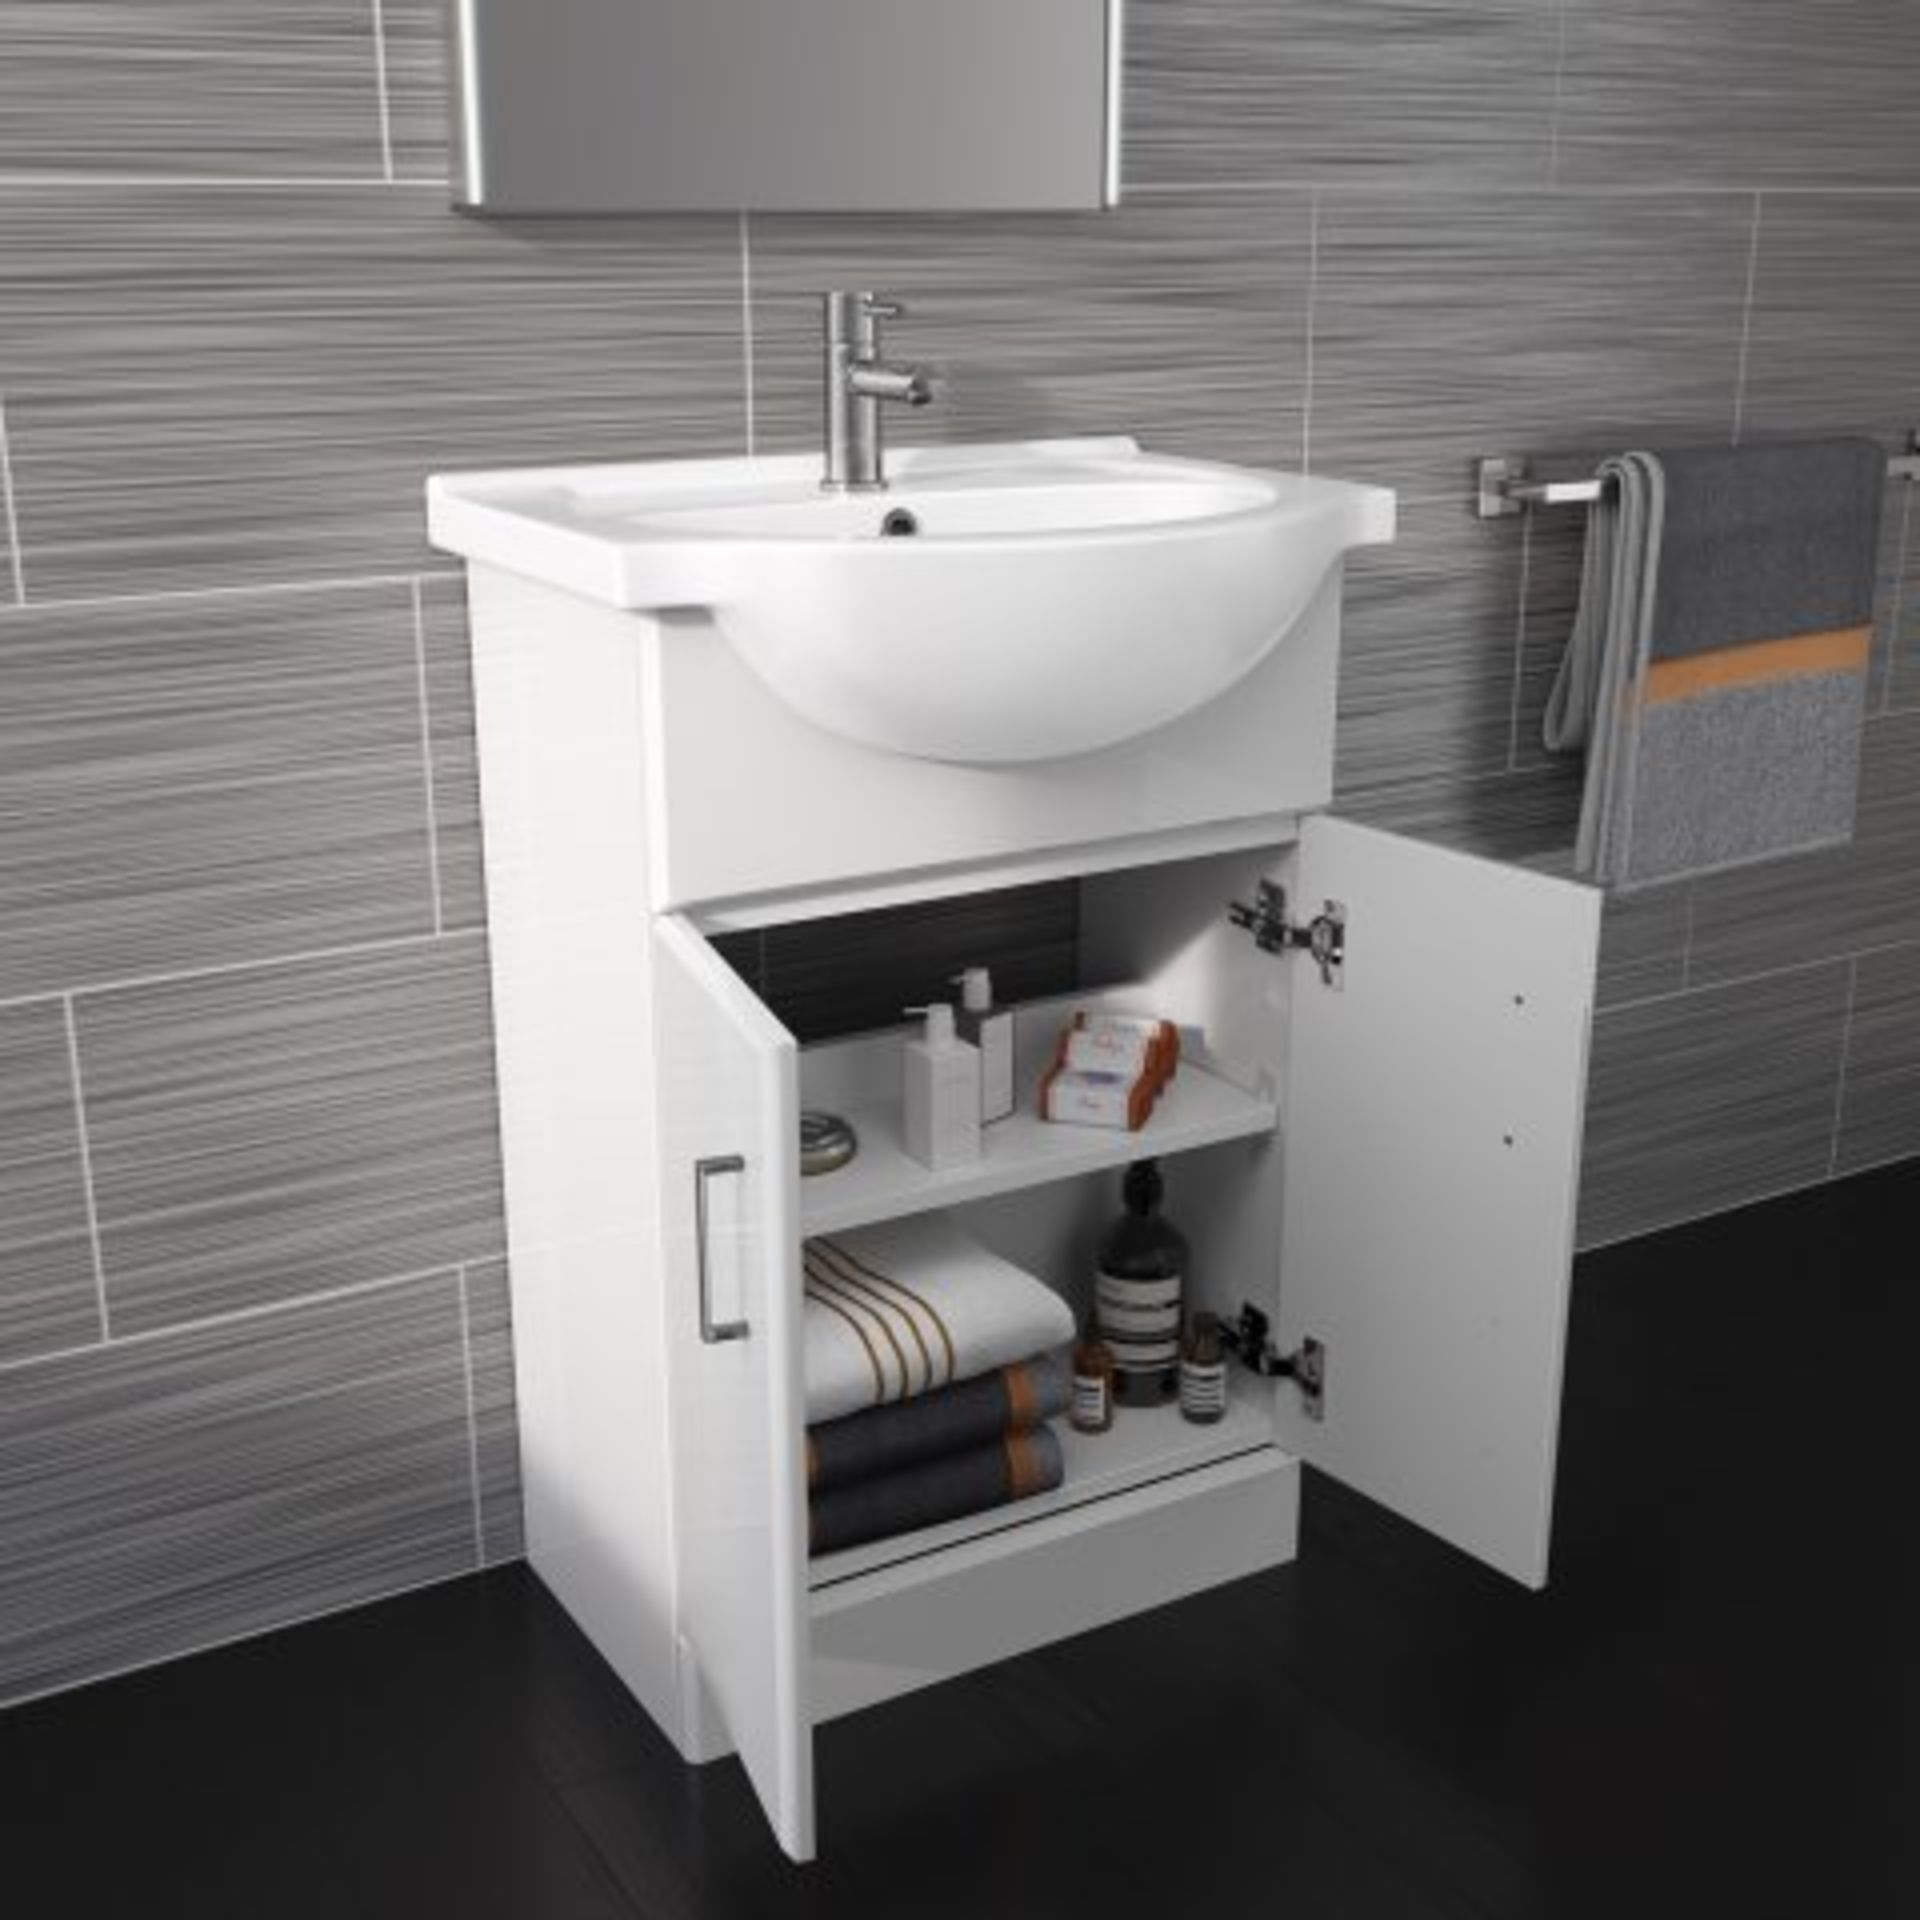 (K130) 550x300mm Quartz Gloss White Built In Basin Cabinet. COMES COMPLETE WITH BASIN. - Image 2 of 3